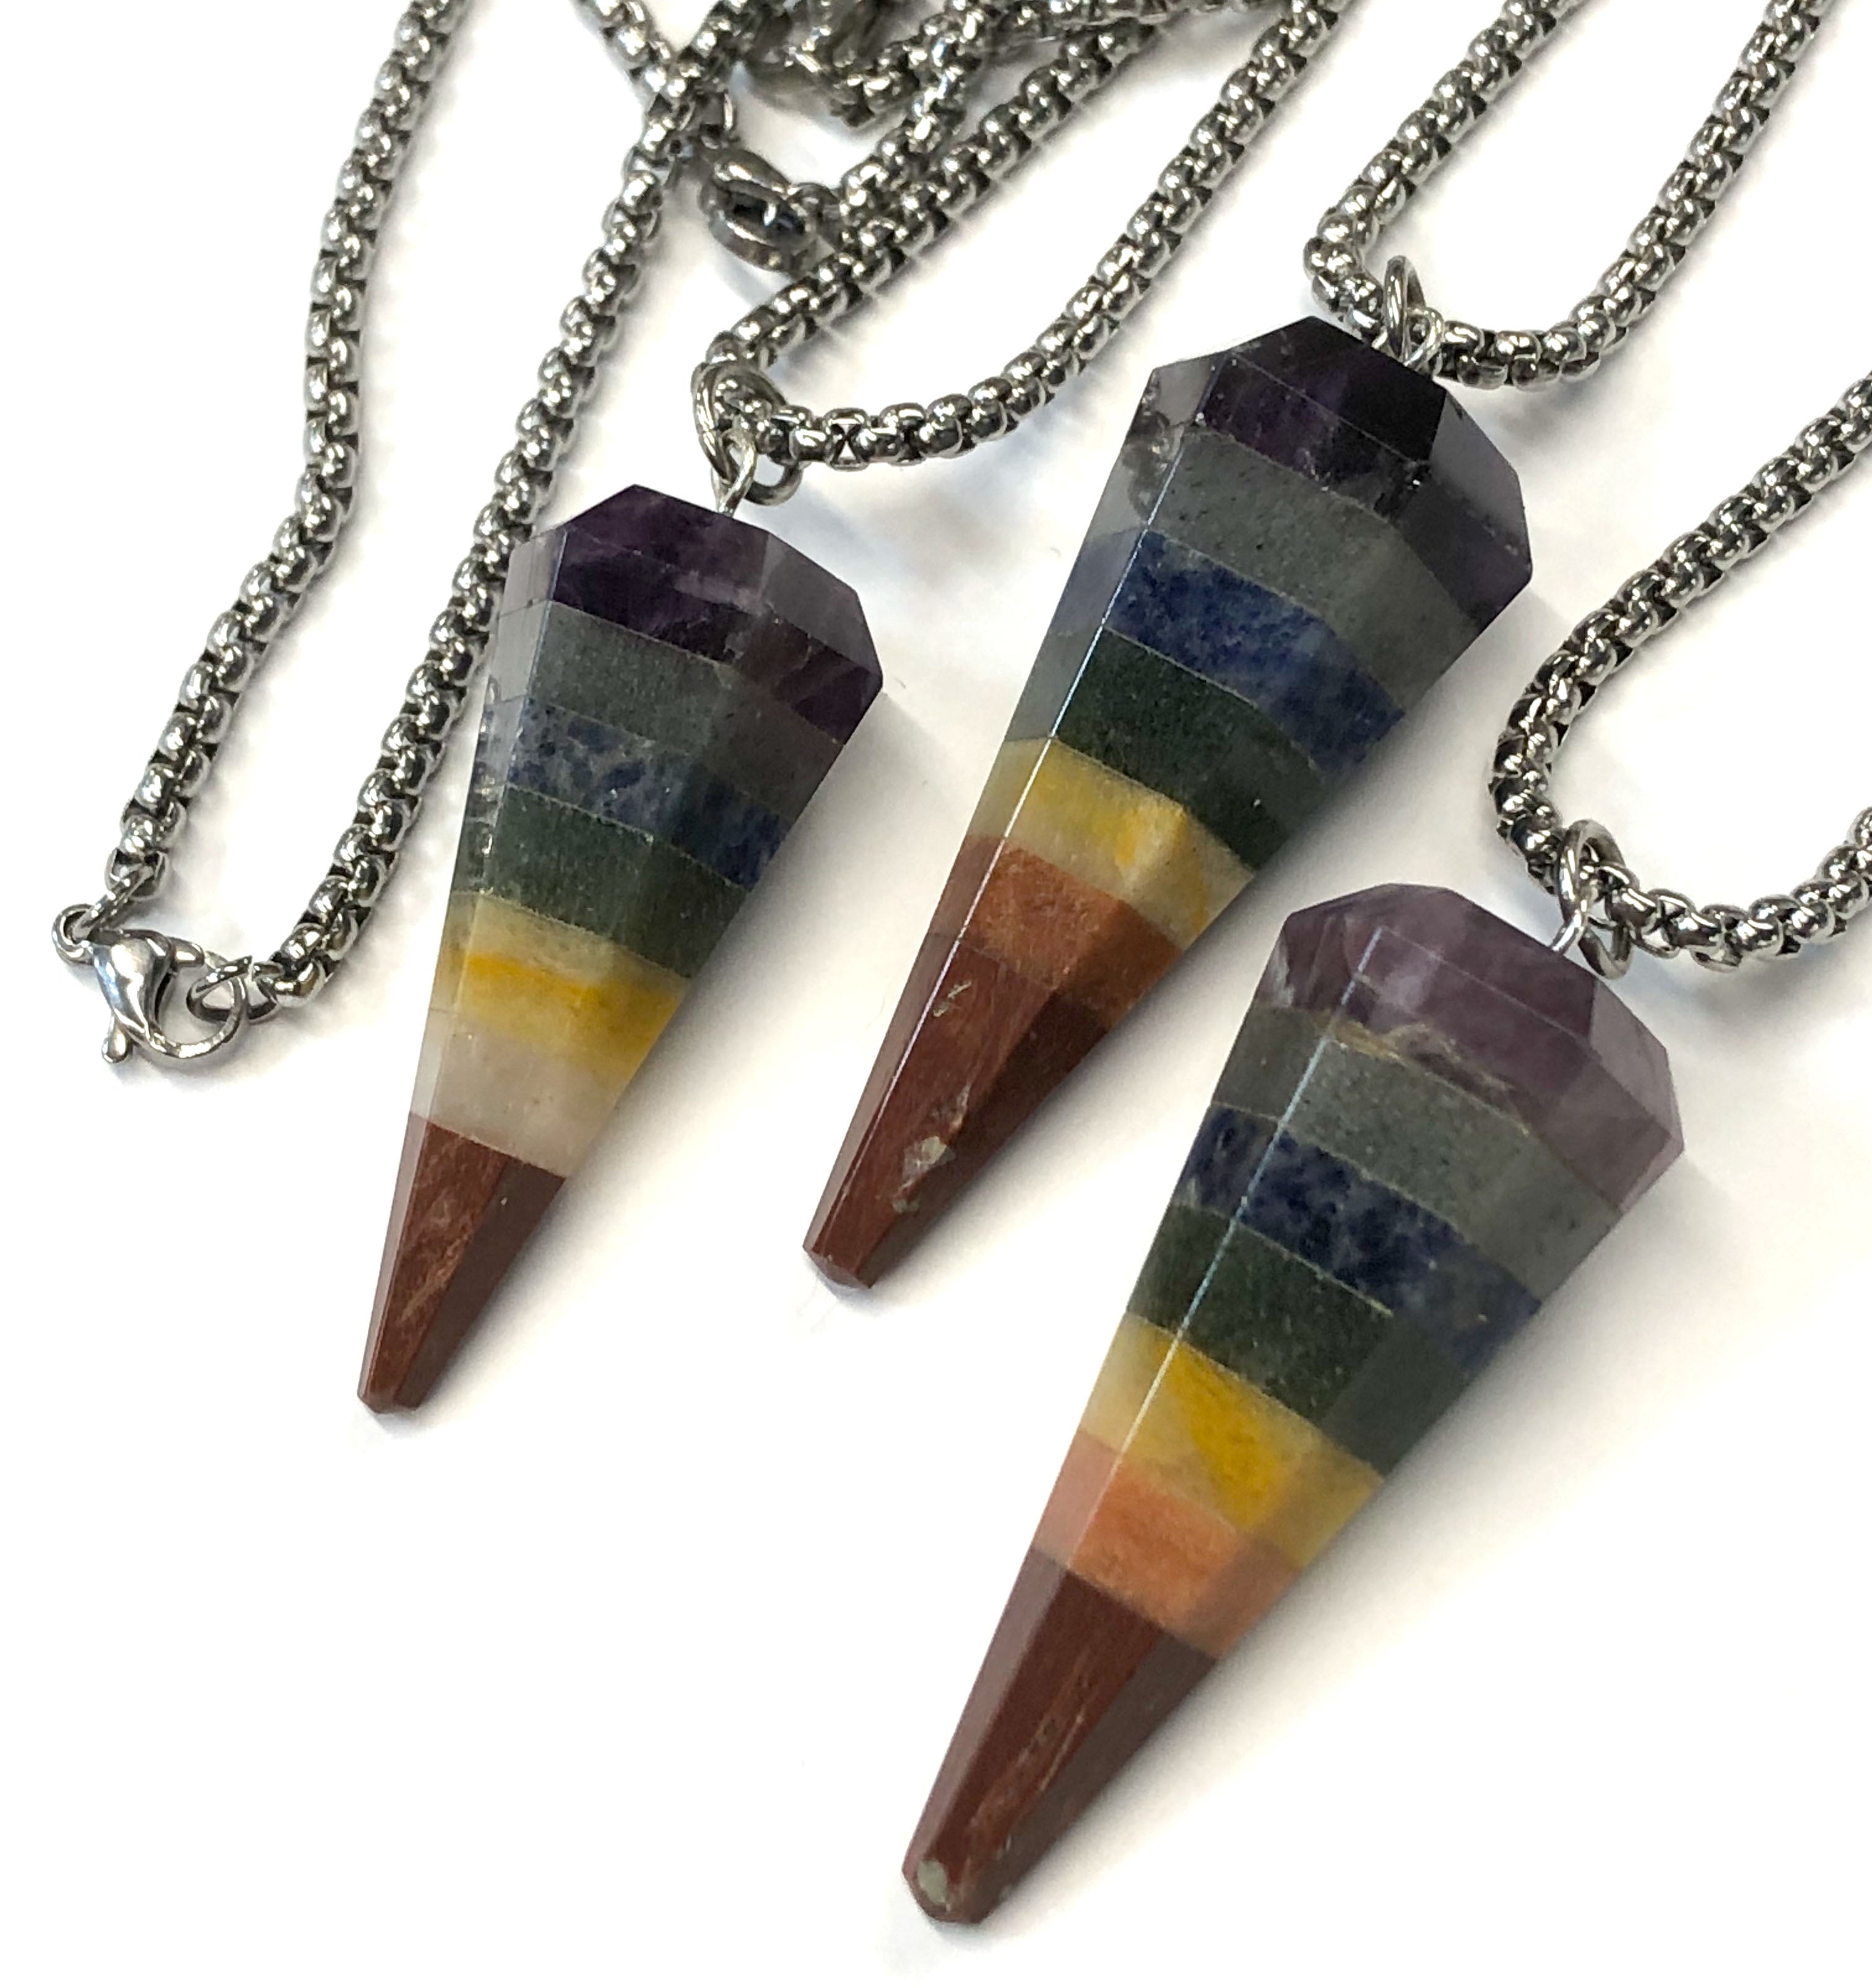 Natural Stone Chakra Healing Crystal Necklace With Hexagonal Bullet And  Amethysts In Pink And Purple Reiki Womens Jewelry From Enjoy_time, $0.65 |  DHgate.Com